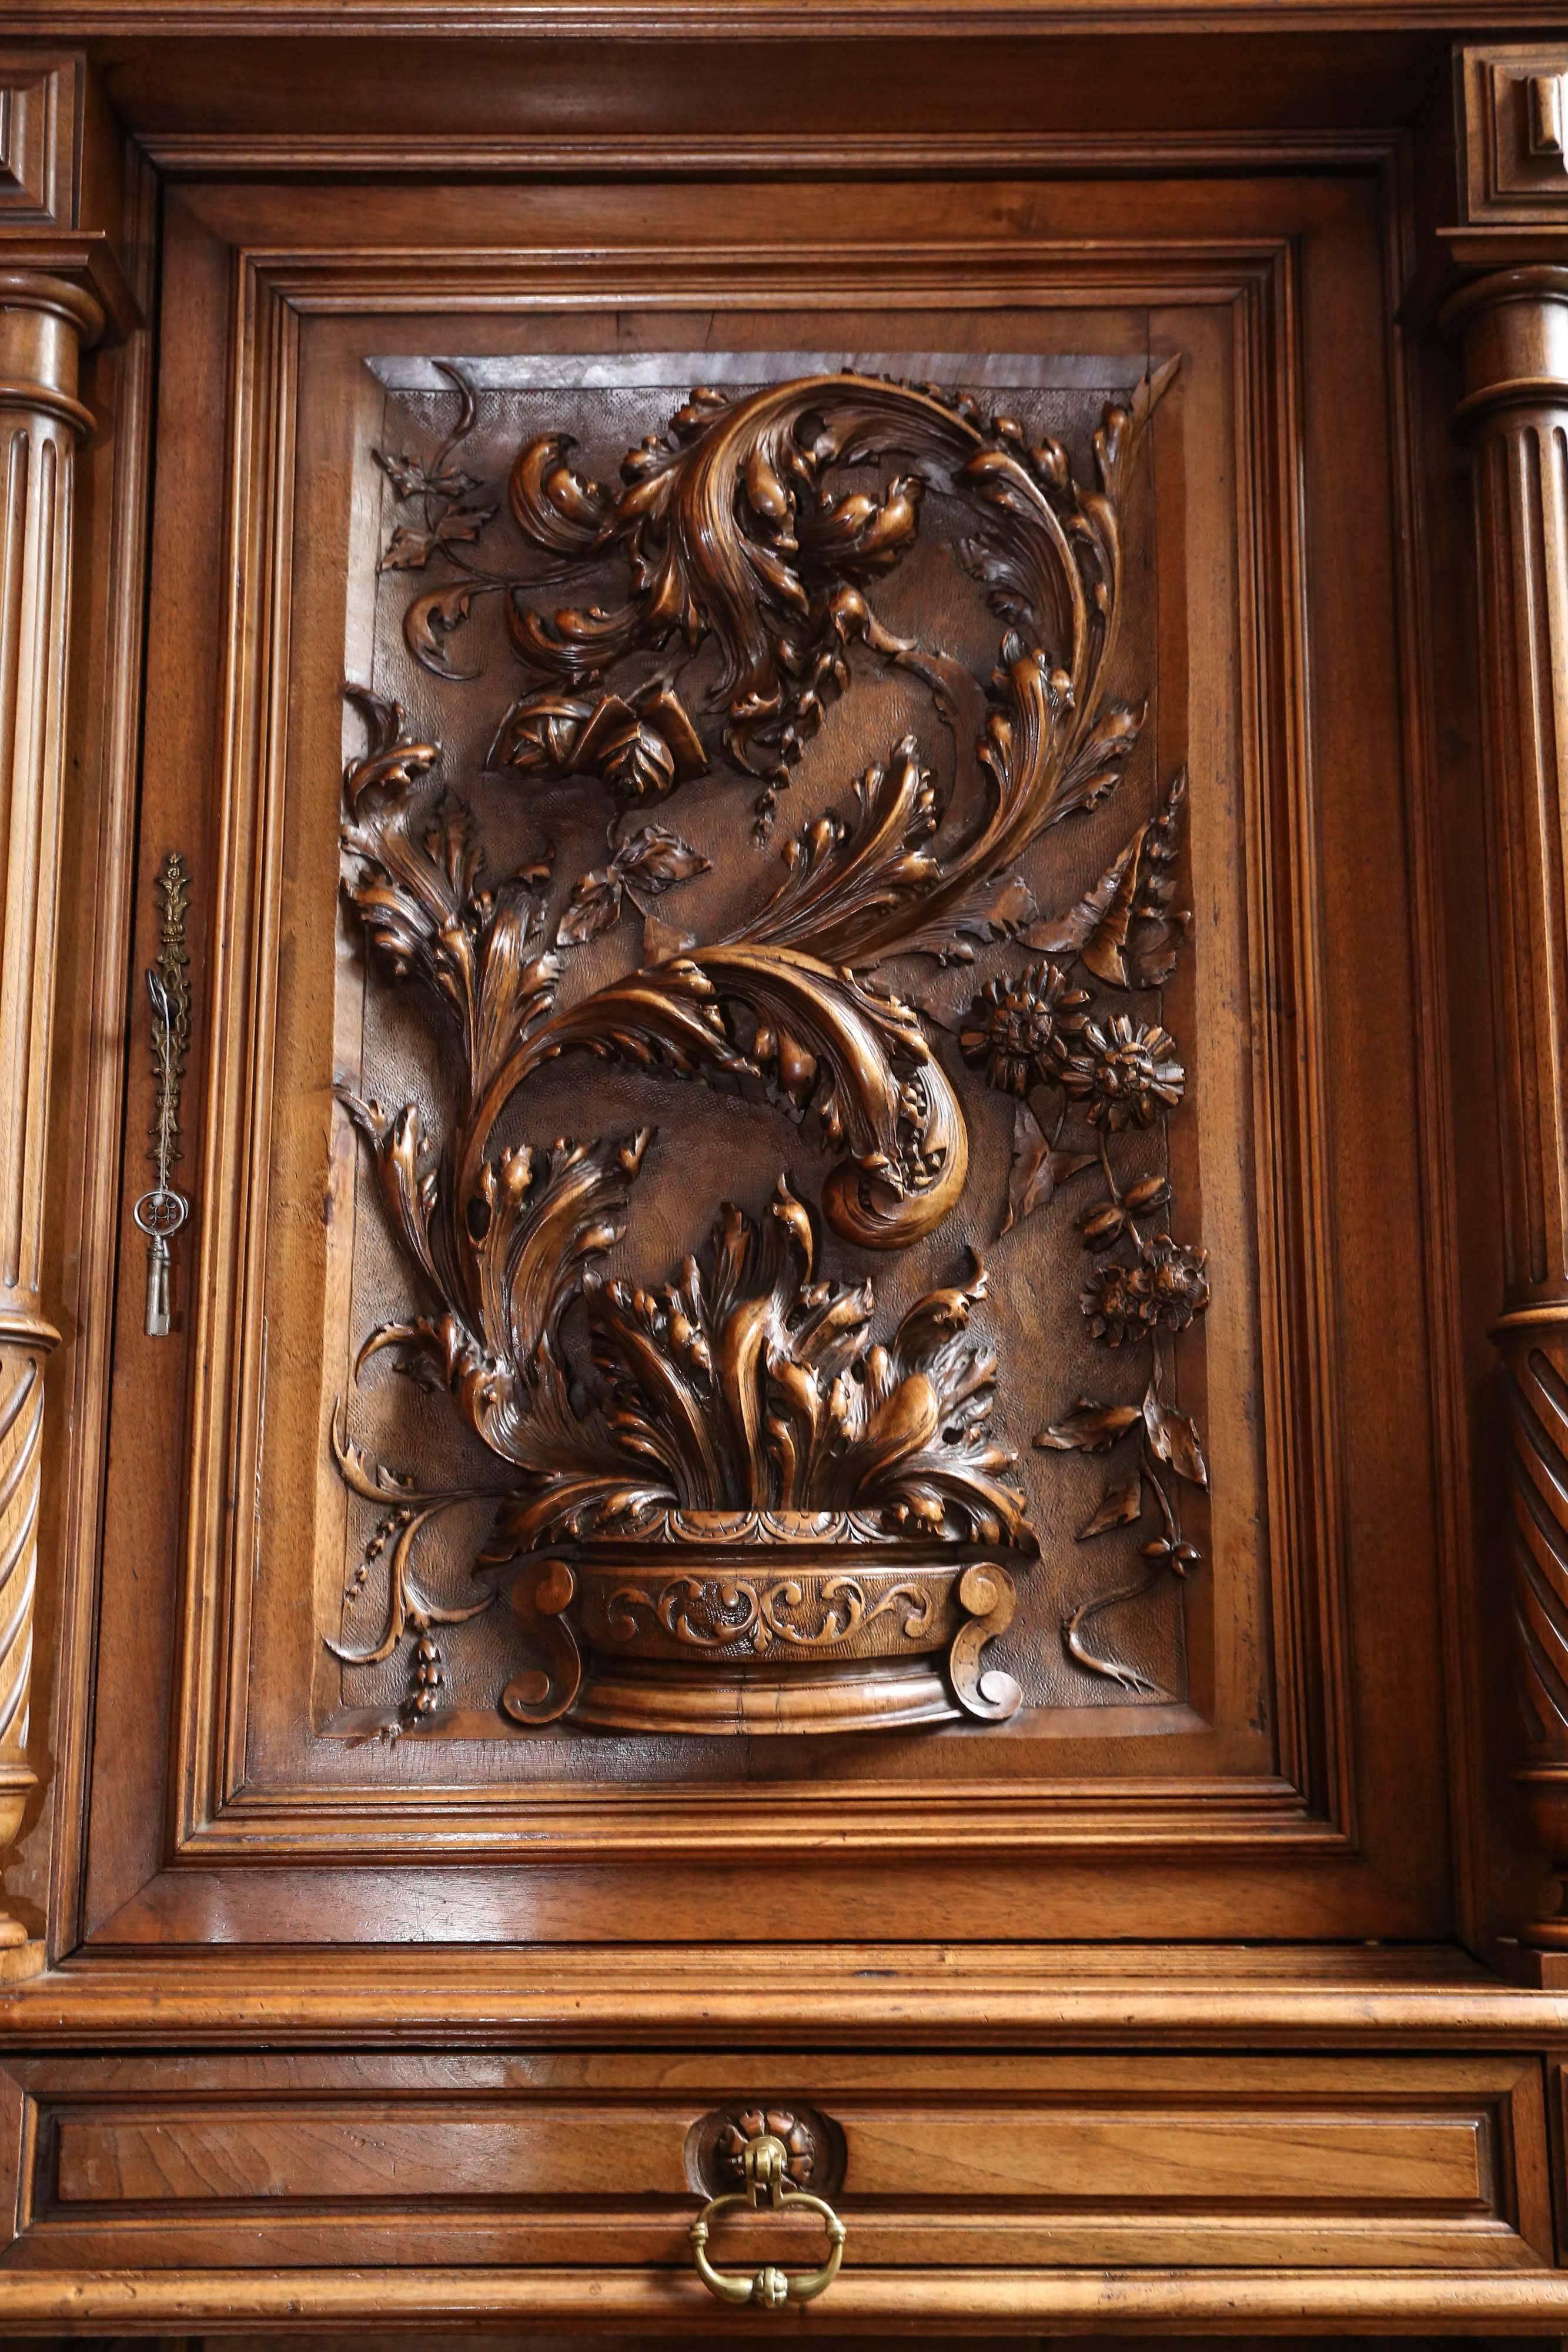 Henry II buffet that is large and impressive; original finish with great carving!
Made of walnut. Pegs together for assembly and shipping. The Carving  is deep and detailed and has
Beautiful flourishes of flowers and leaves. It has display space and